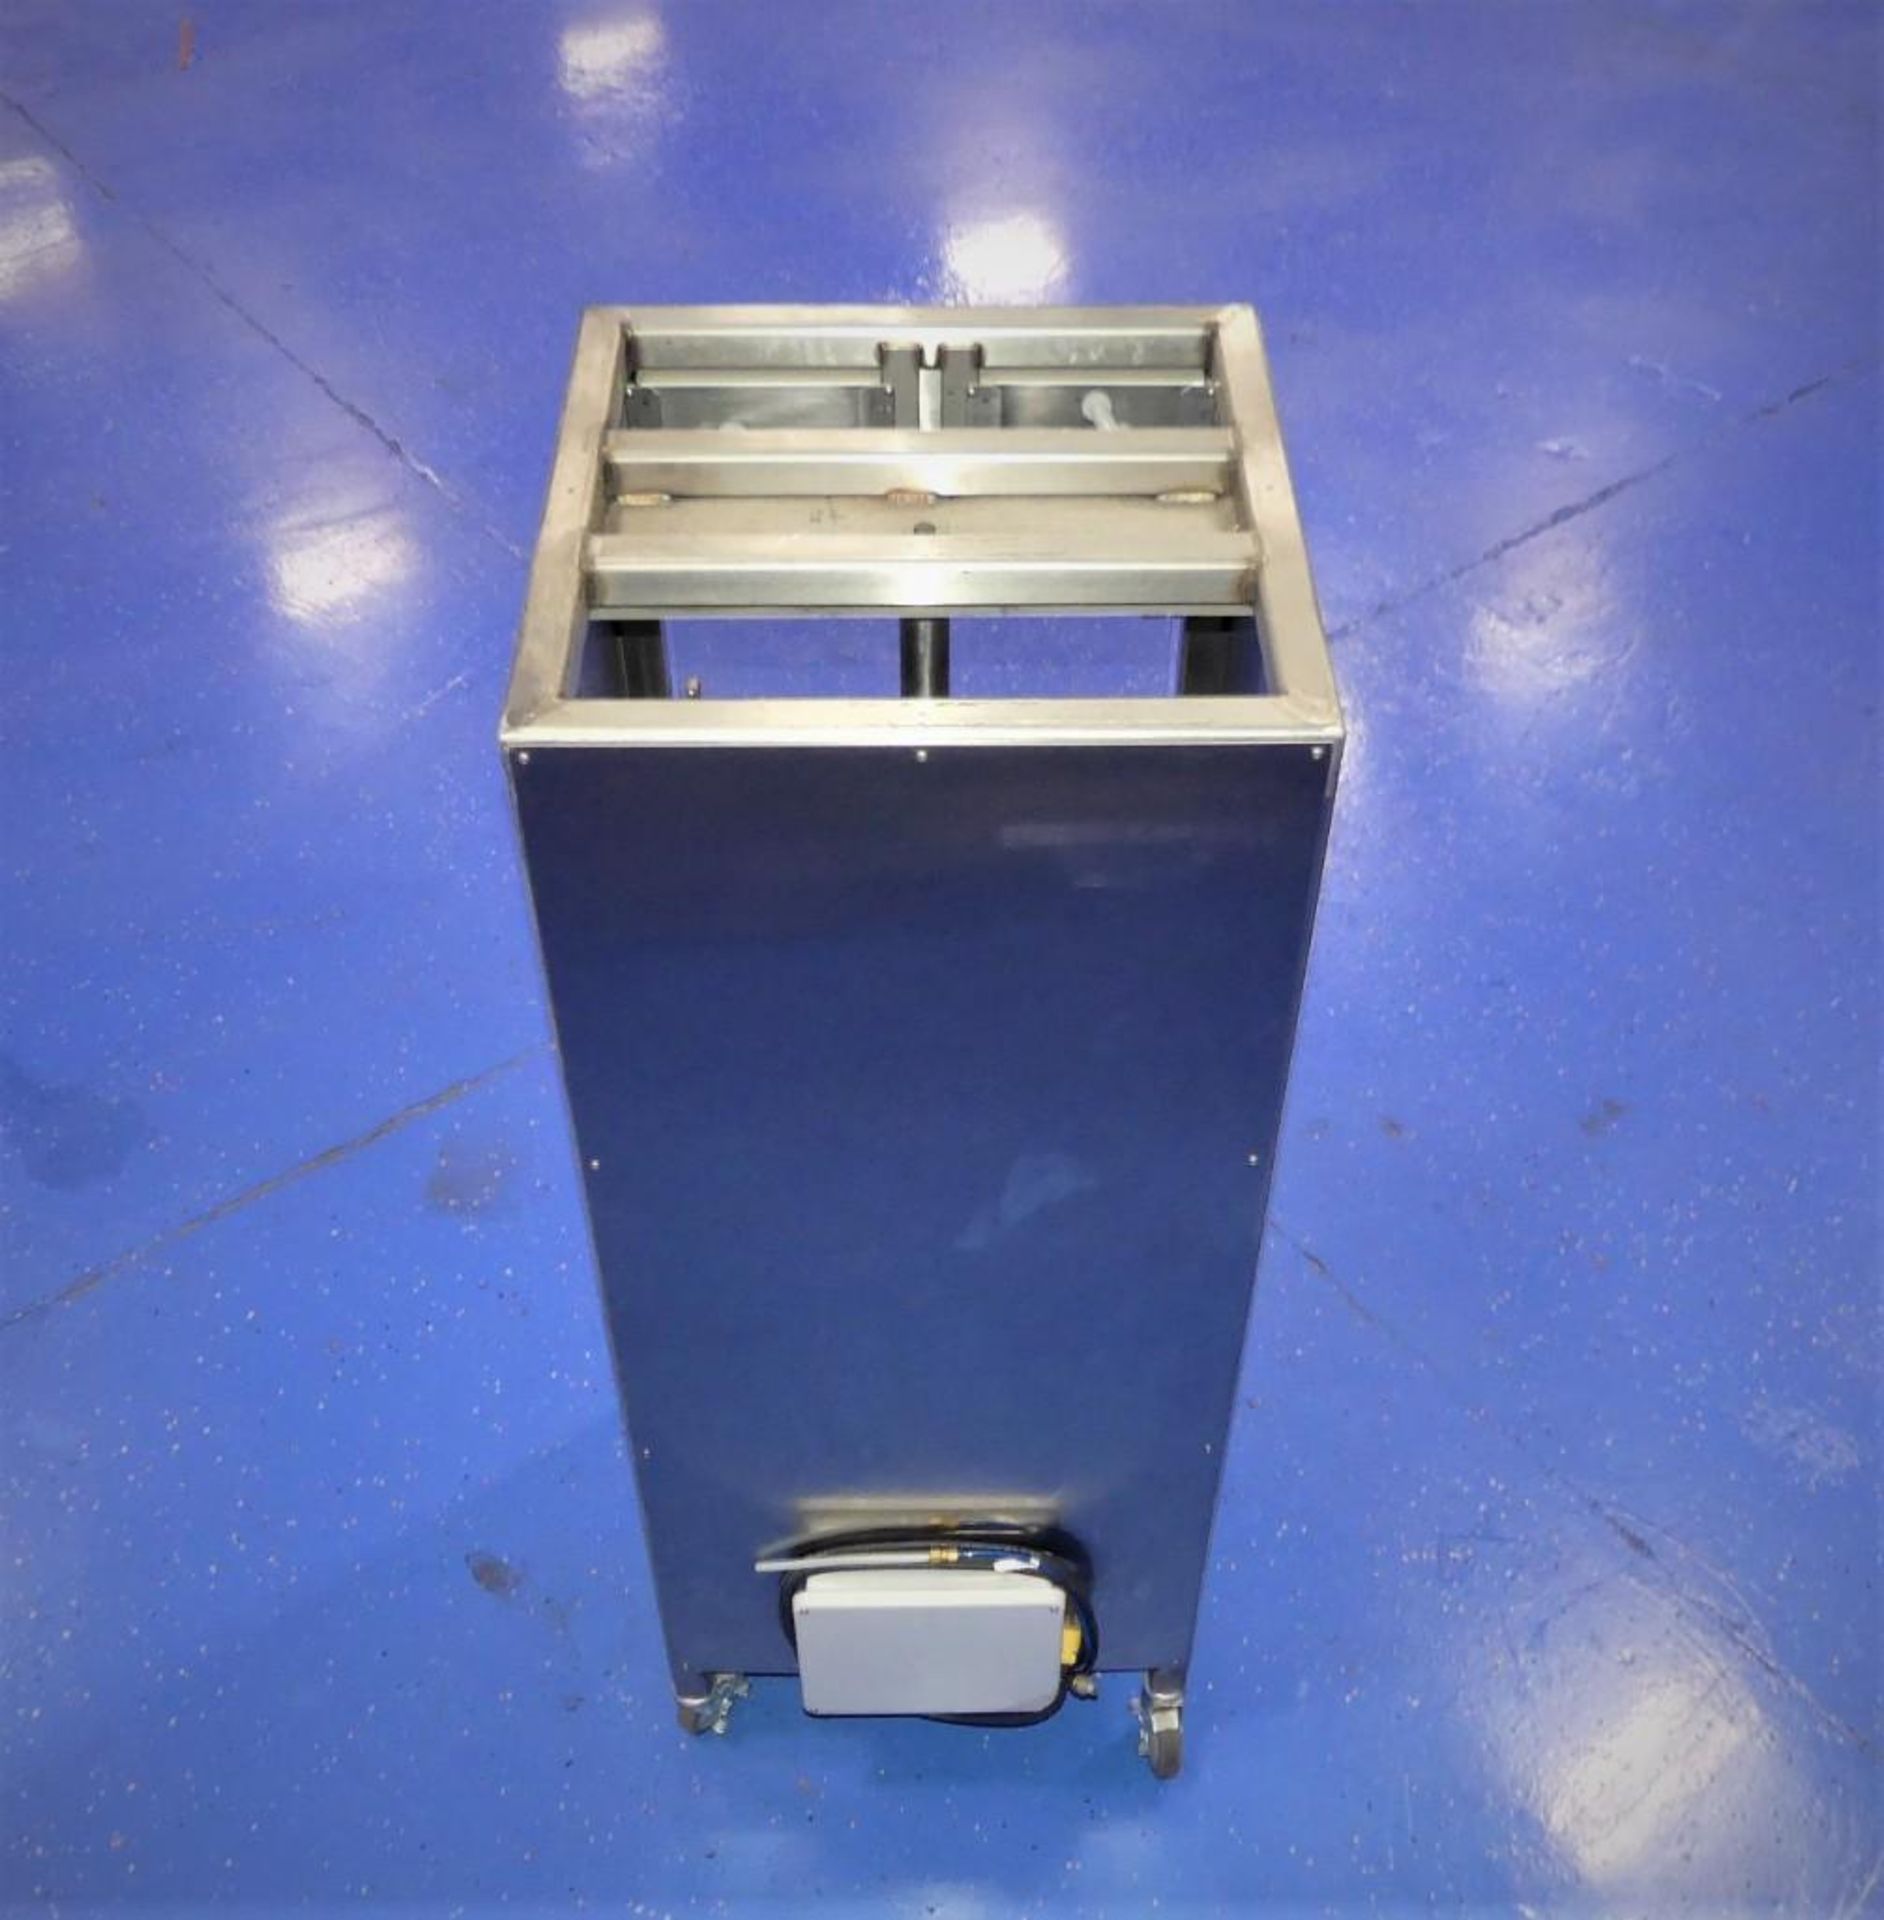 Pneumatic Liquid Press with Jacketed Hopper - Image 3 of 5